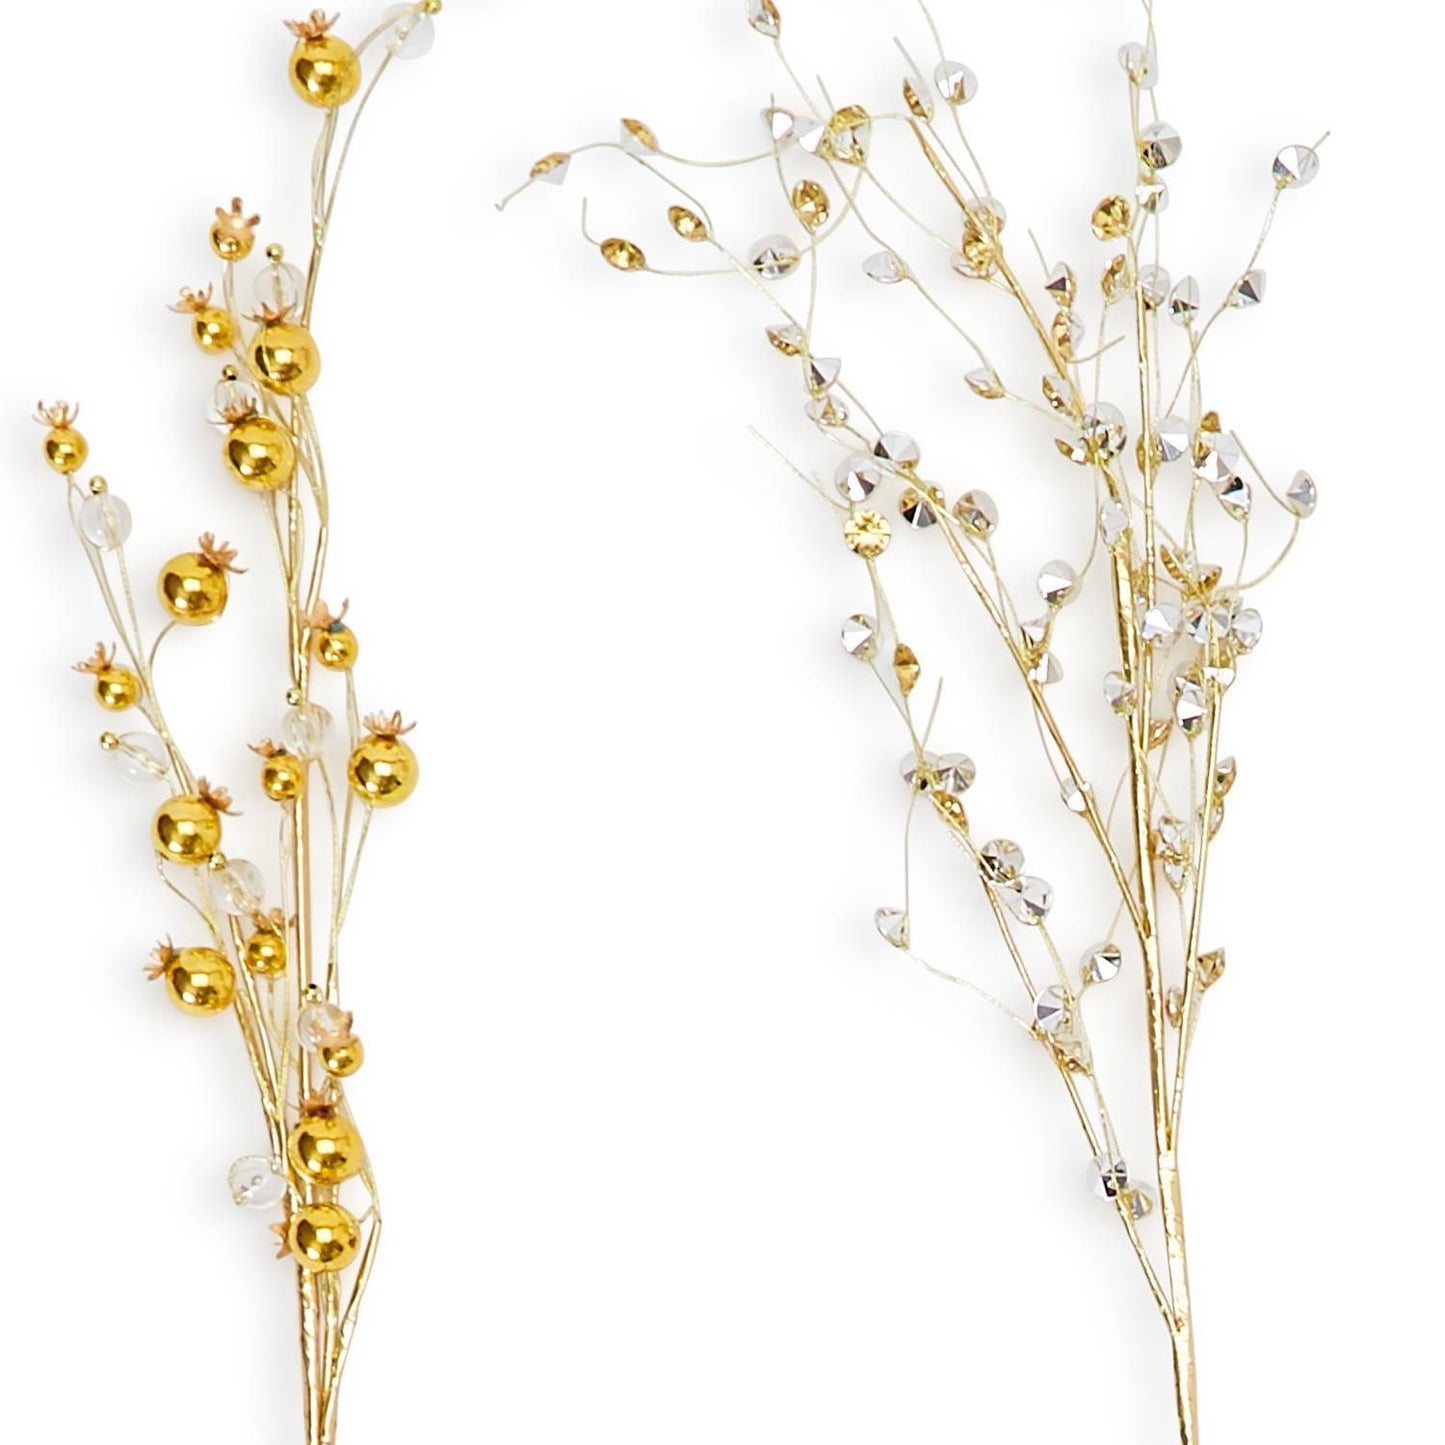 Crystals And Berries 24-Piece Hand-Crafted Metallic Floral Stem in 2 Styles Each